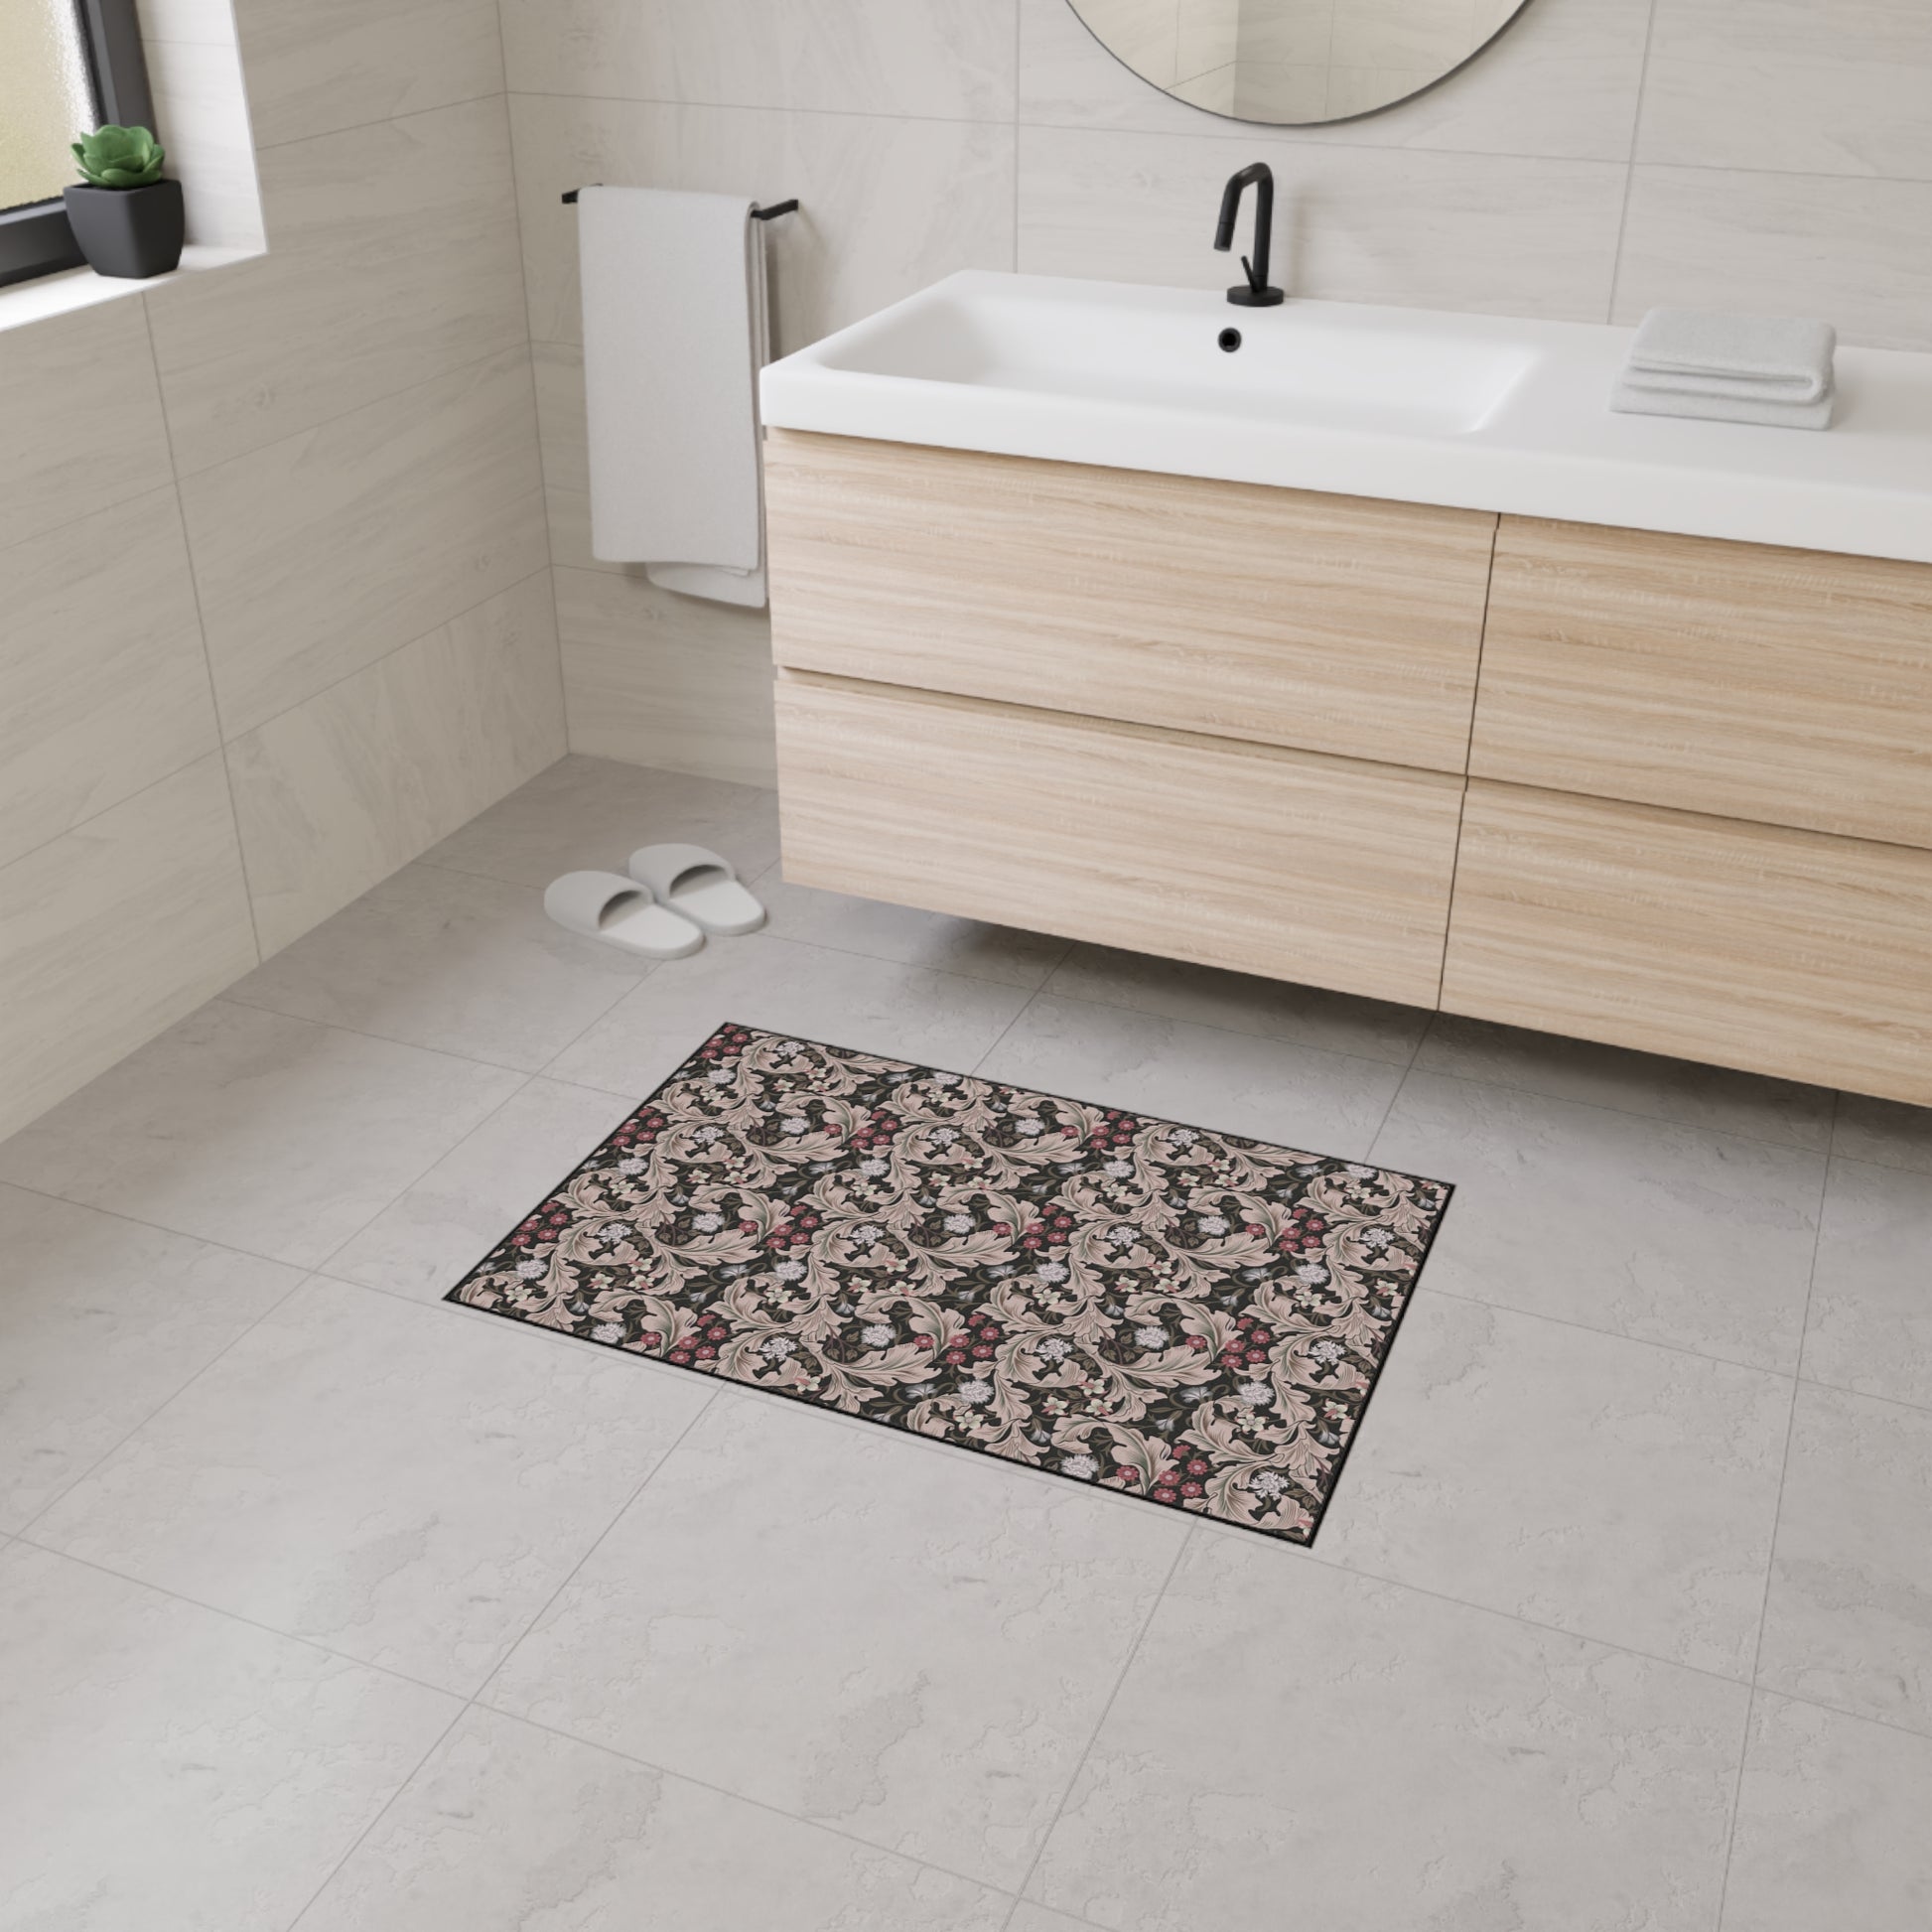 william-morris-co-heavy-duty-floor-mat-leicester-collection-mocha-12